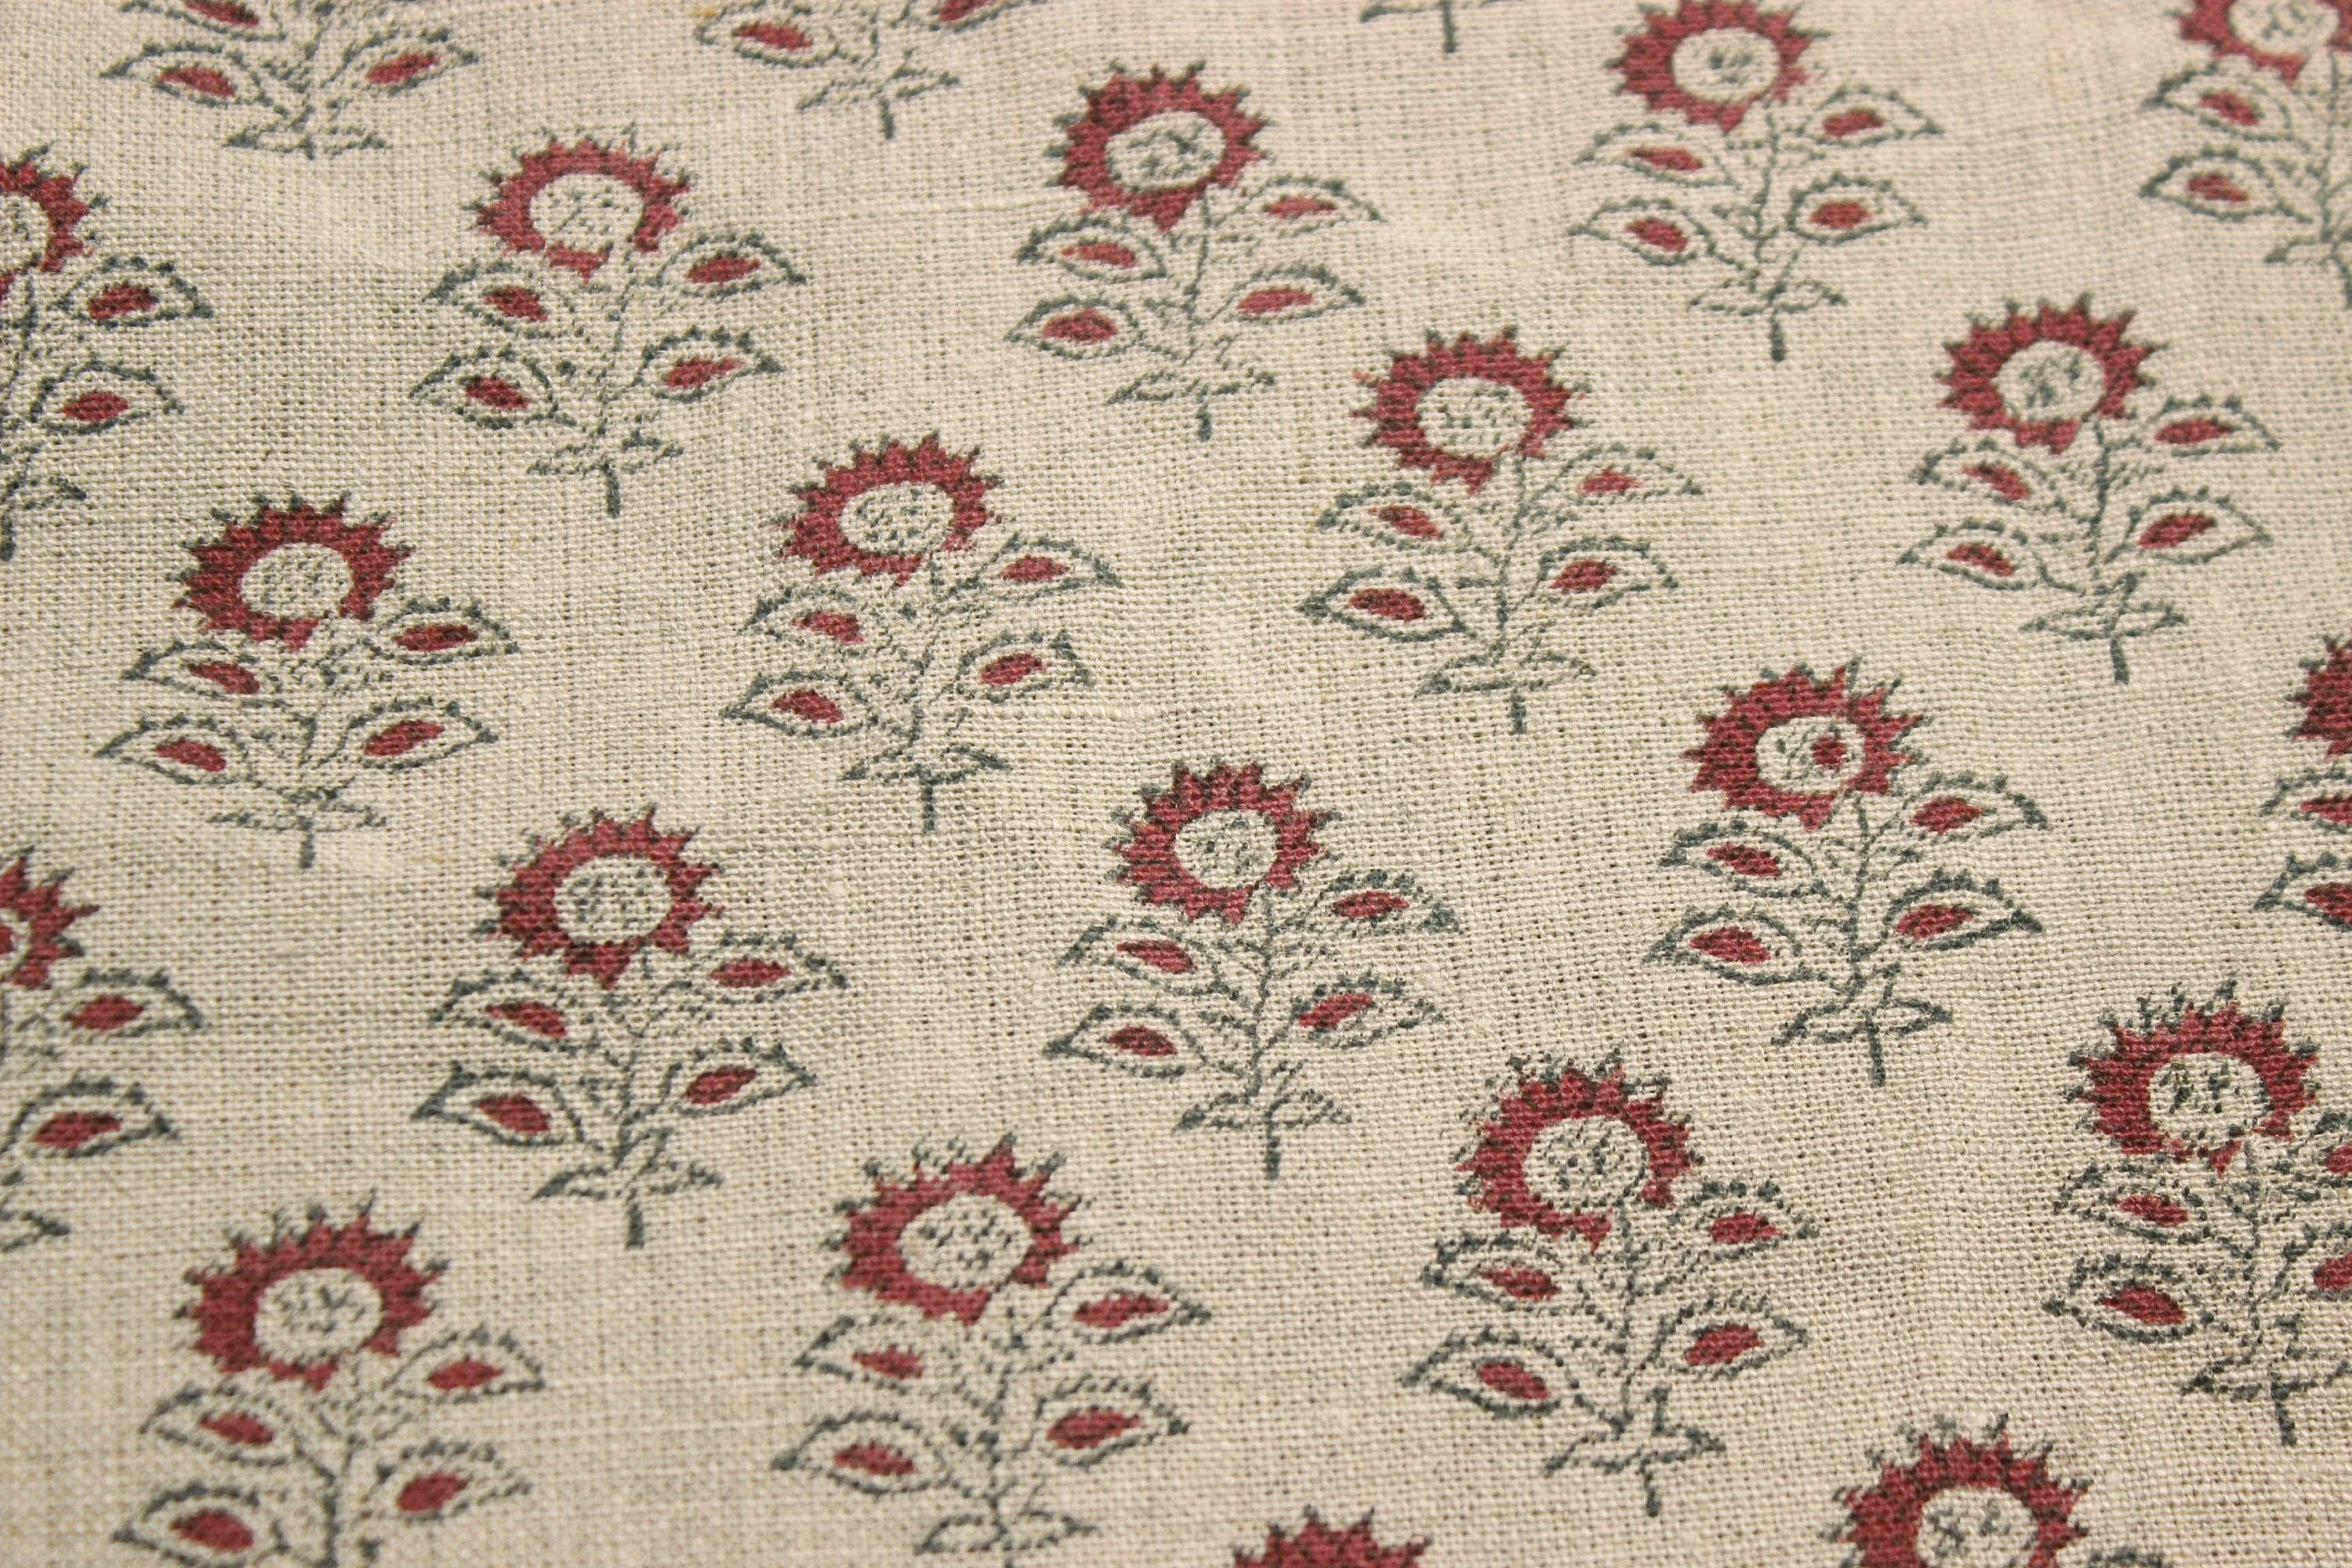 Bagru Butti  Hand Block Print Fabric  By The Yard  Floral Pattern Art  Home Decor Fabric  Linen Upholstery  Cushion Cover Fabric.